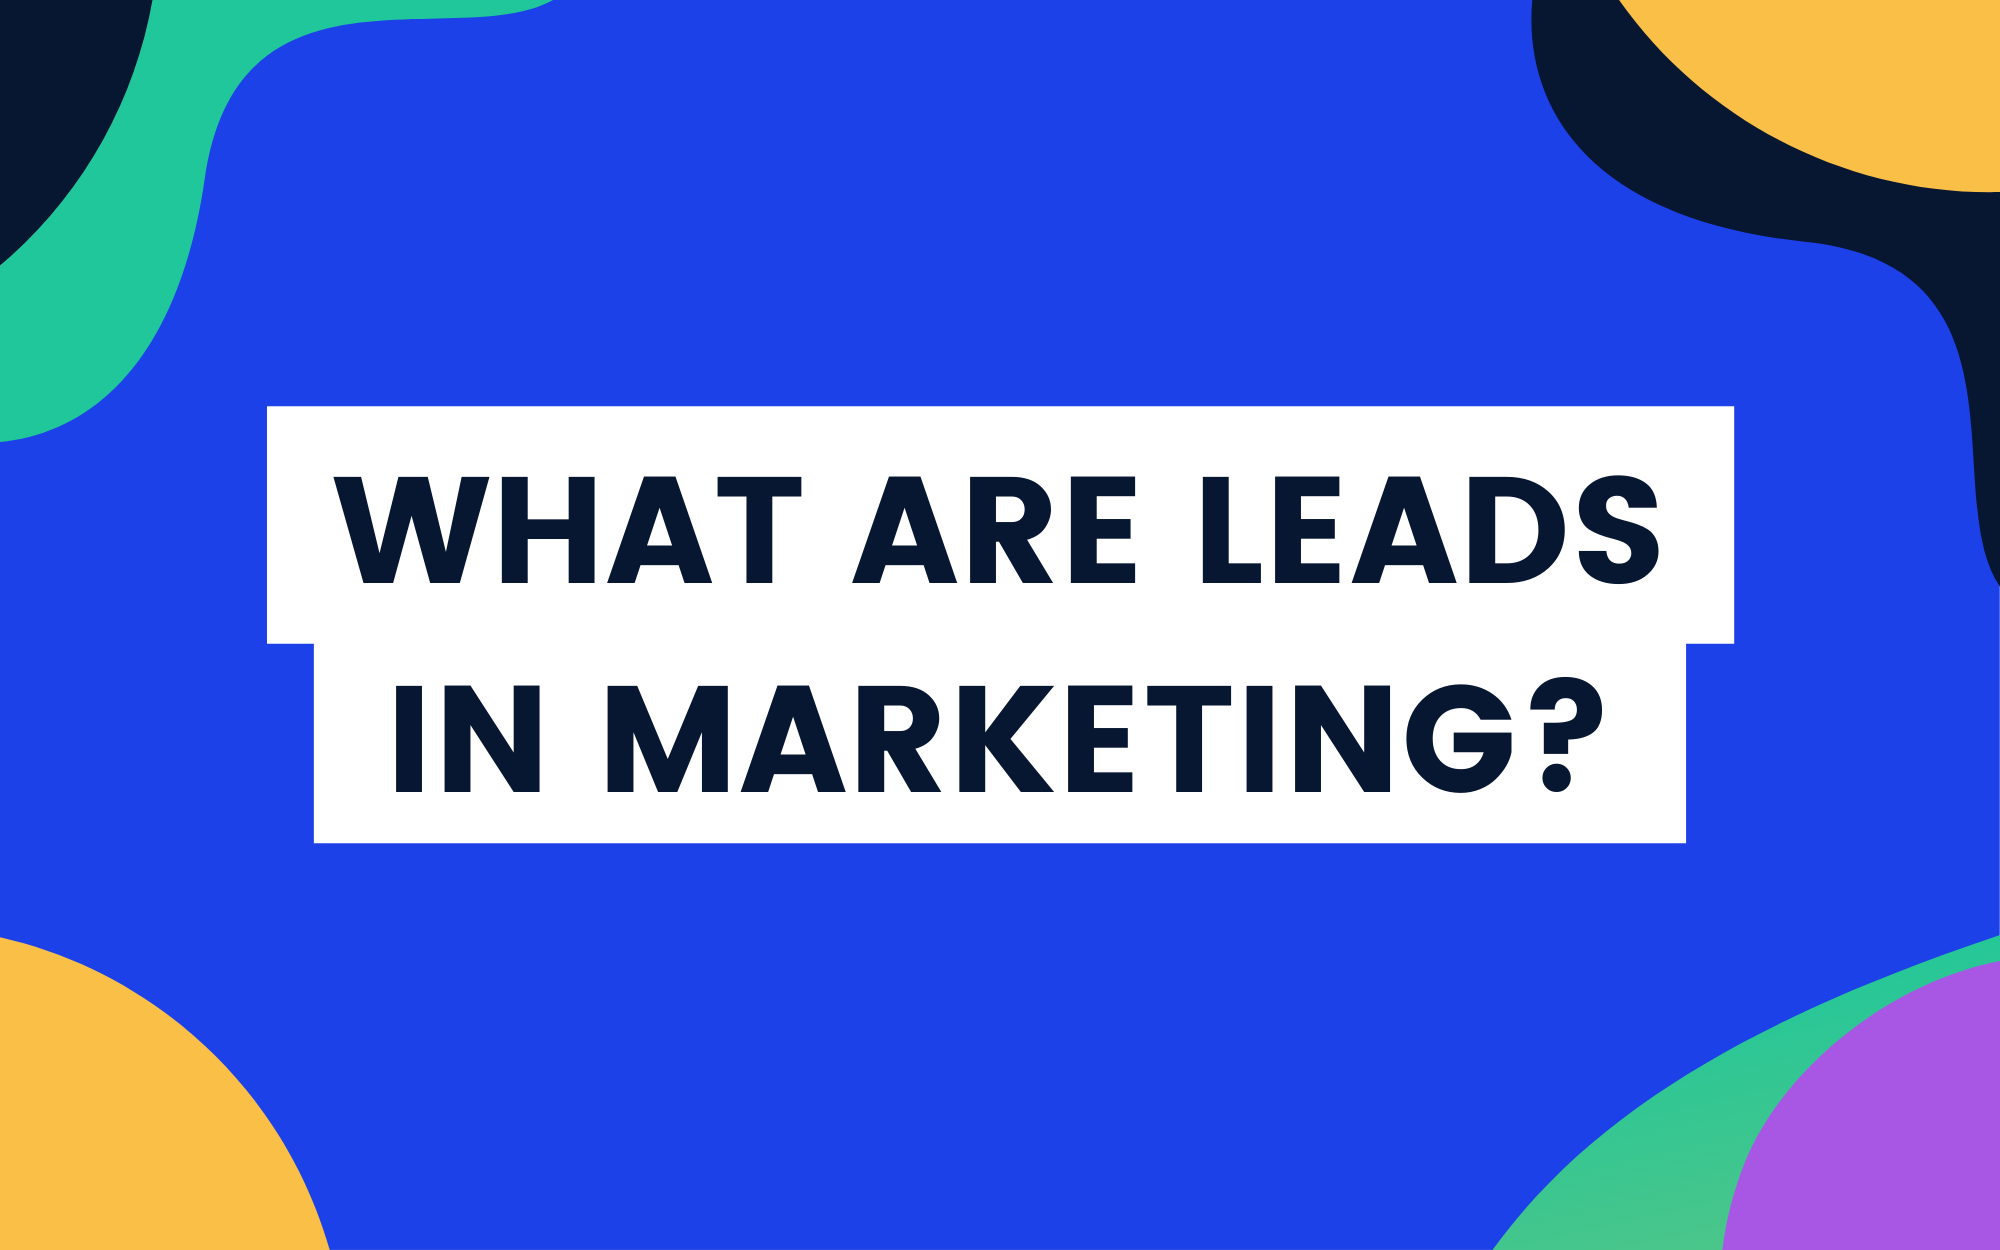 What are leads in marketing?